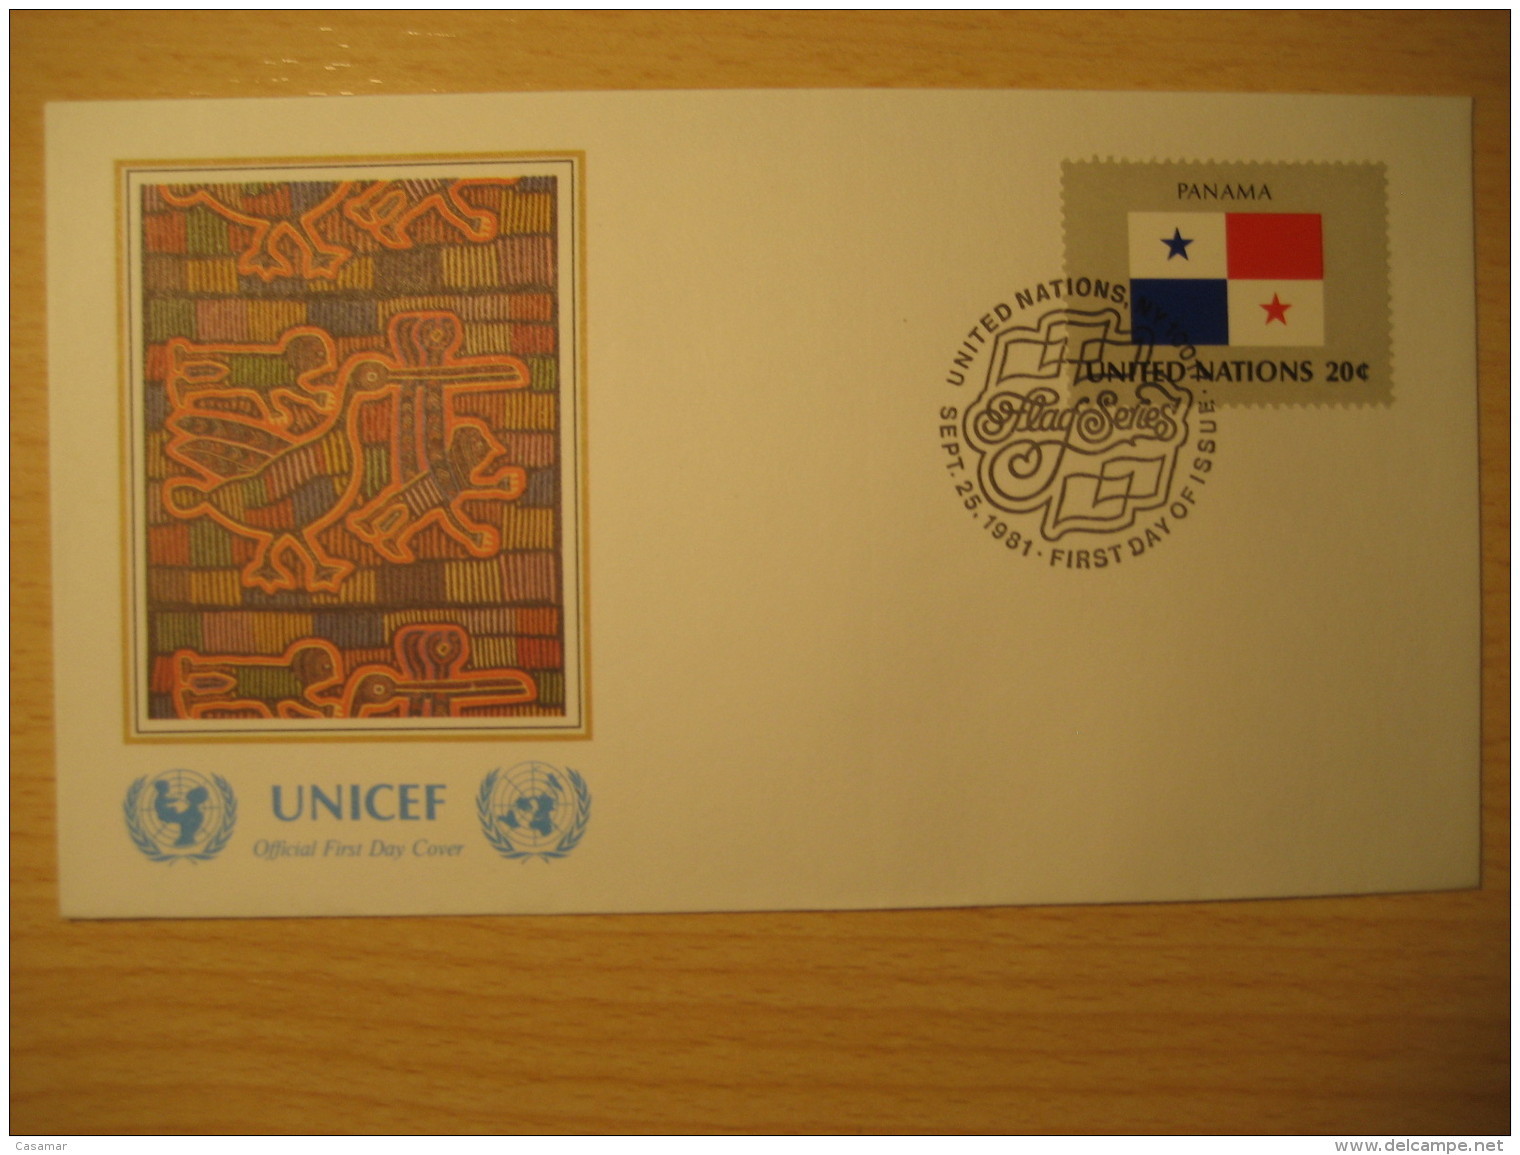 PANAMA New York 1981 FDC Cancel UNICEF Cover UNITED NATIONS UN NY Flag Series Flags Cuna Indian Mola - Panama